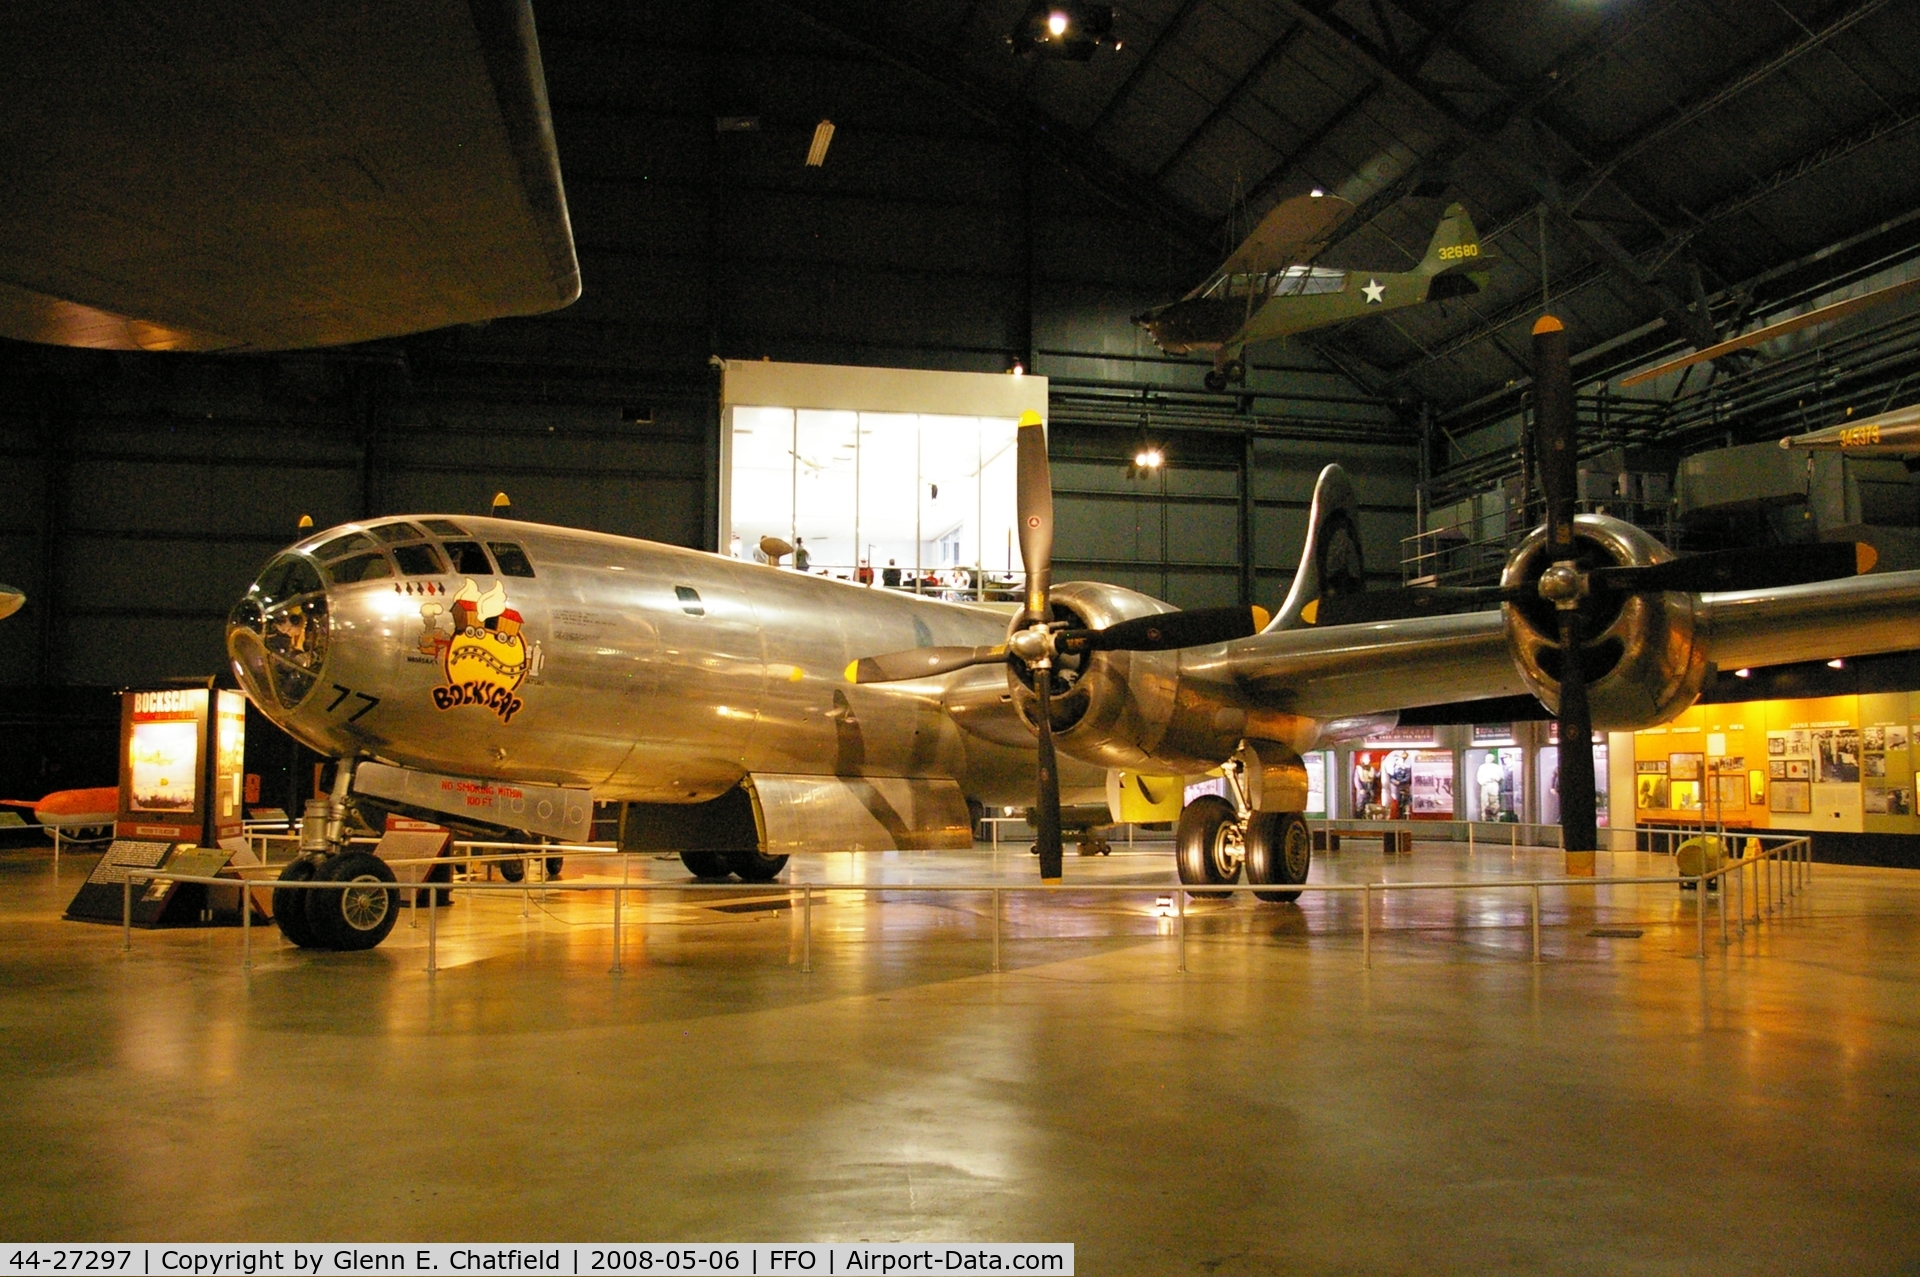 44-27297, 1944 Boeing B-29 Superfortress C/N 3615, The plane that bombed Nagasaki, at the National Museum of the U.S. Air Force